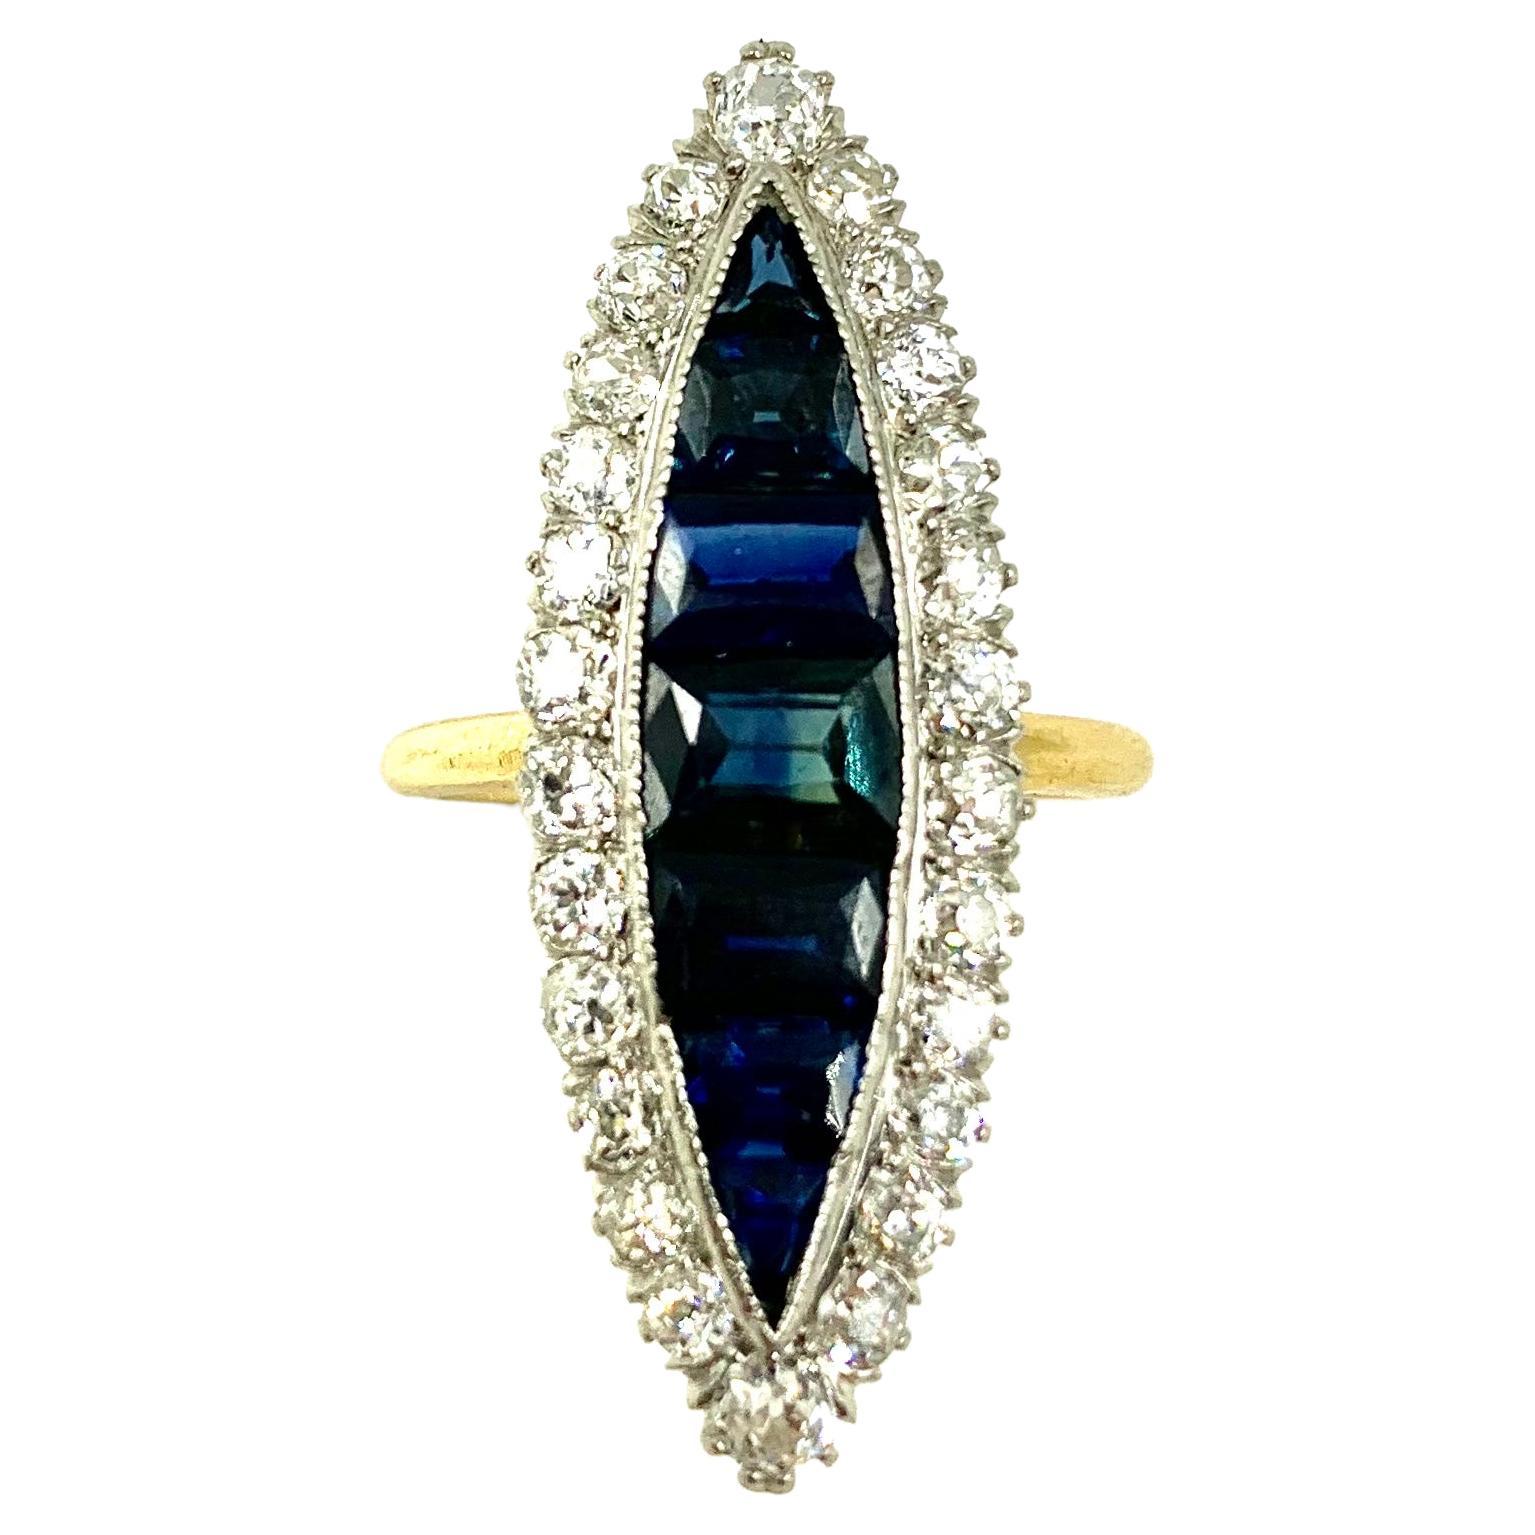 Large Antique Edwardian Diamond, Invisibly Set Sapphire 18k Gold Navette Ring For Sale